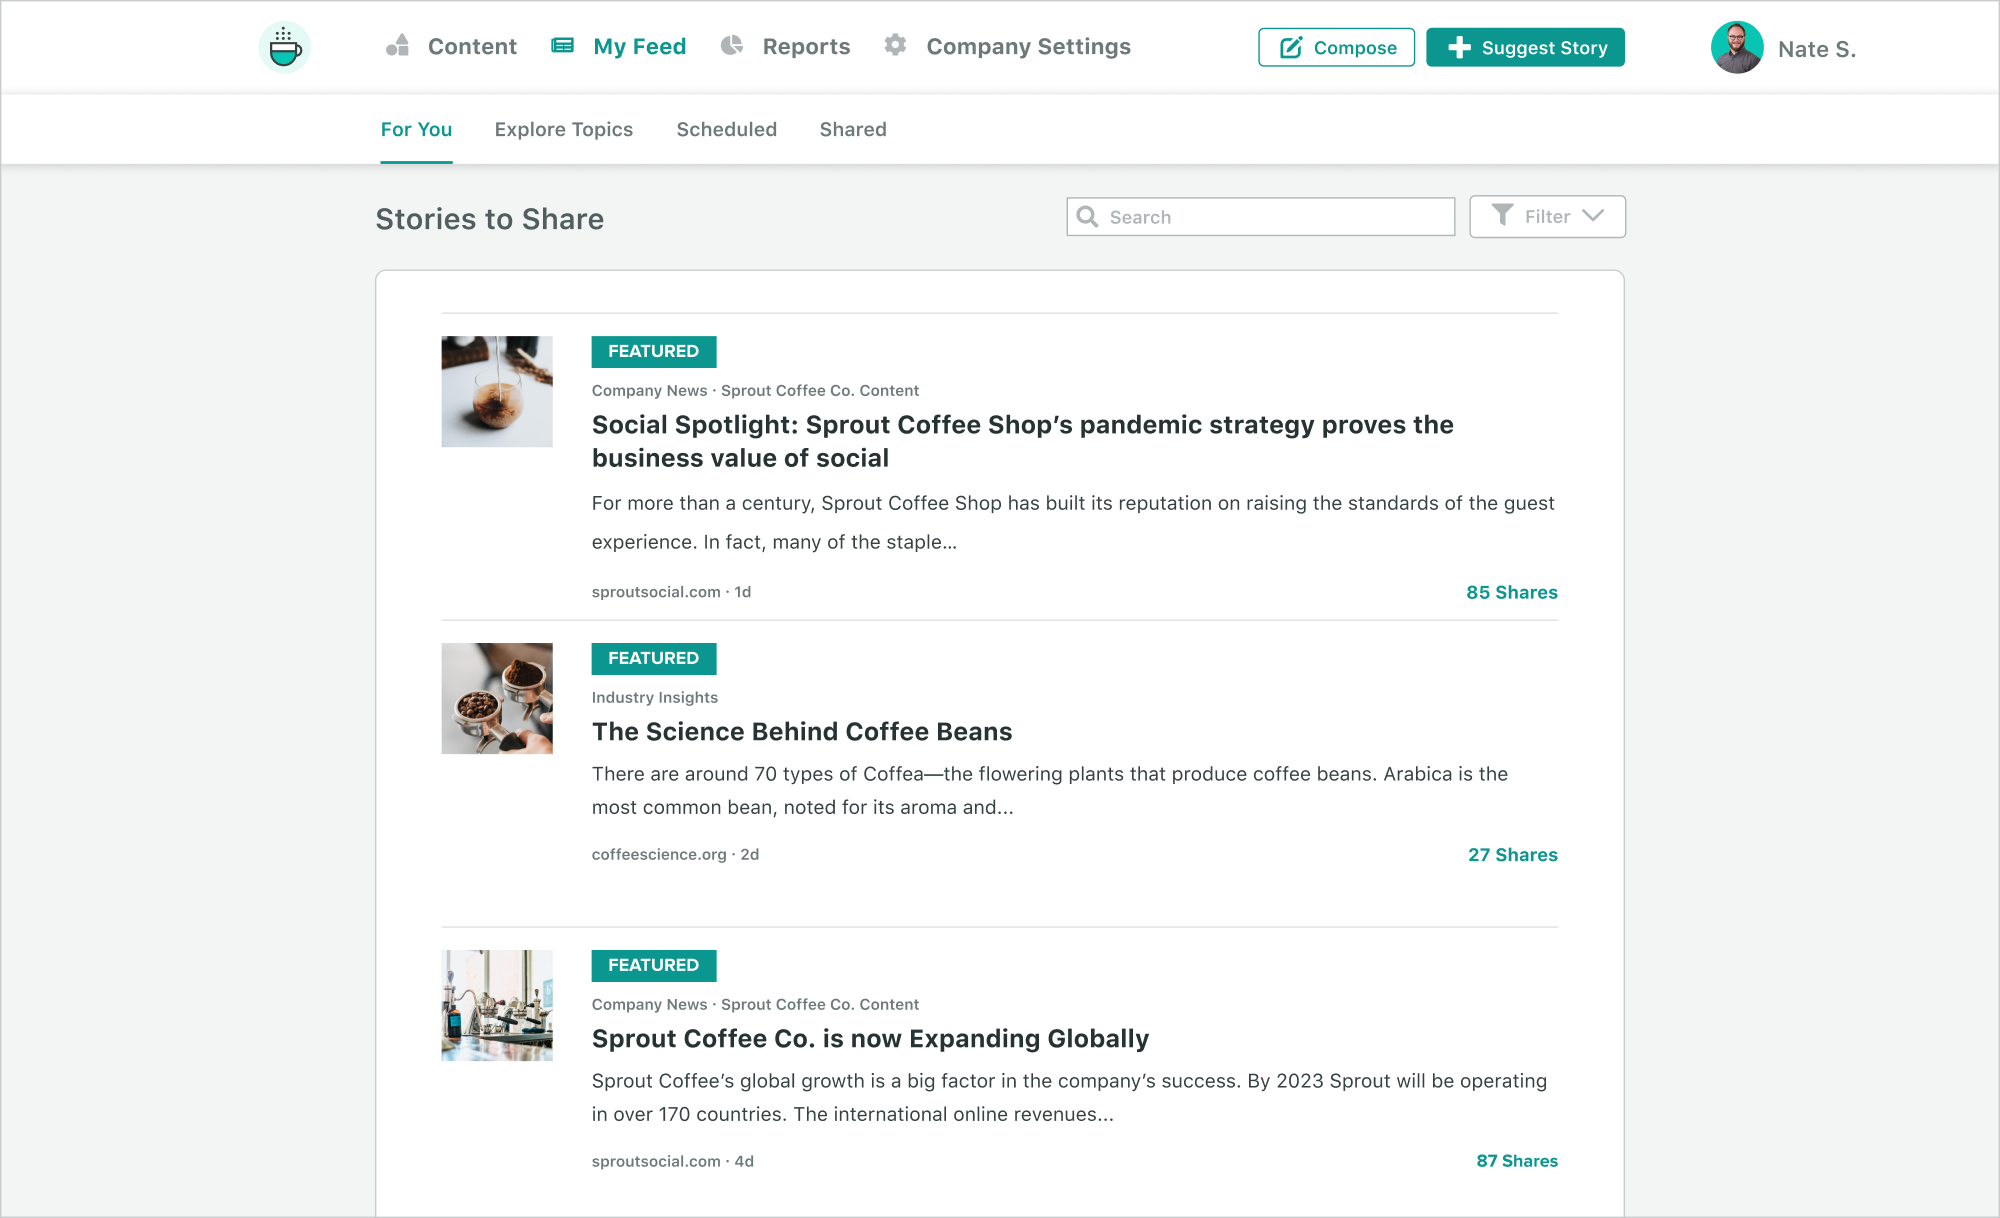 Sprout Social's Employee Advocacy solutions shows how to find and create stories to share, with inline metrics and reports available.